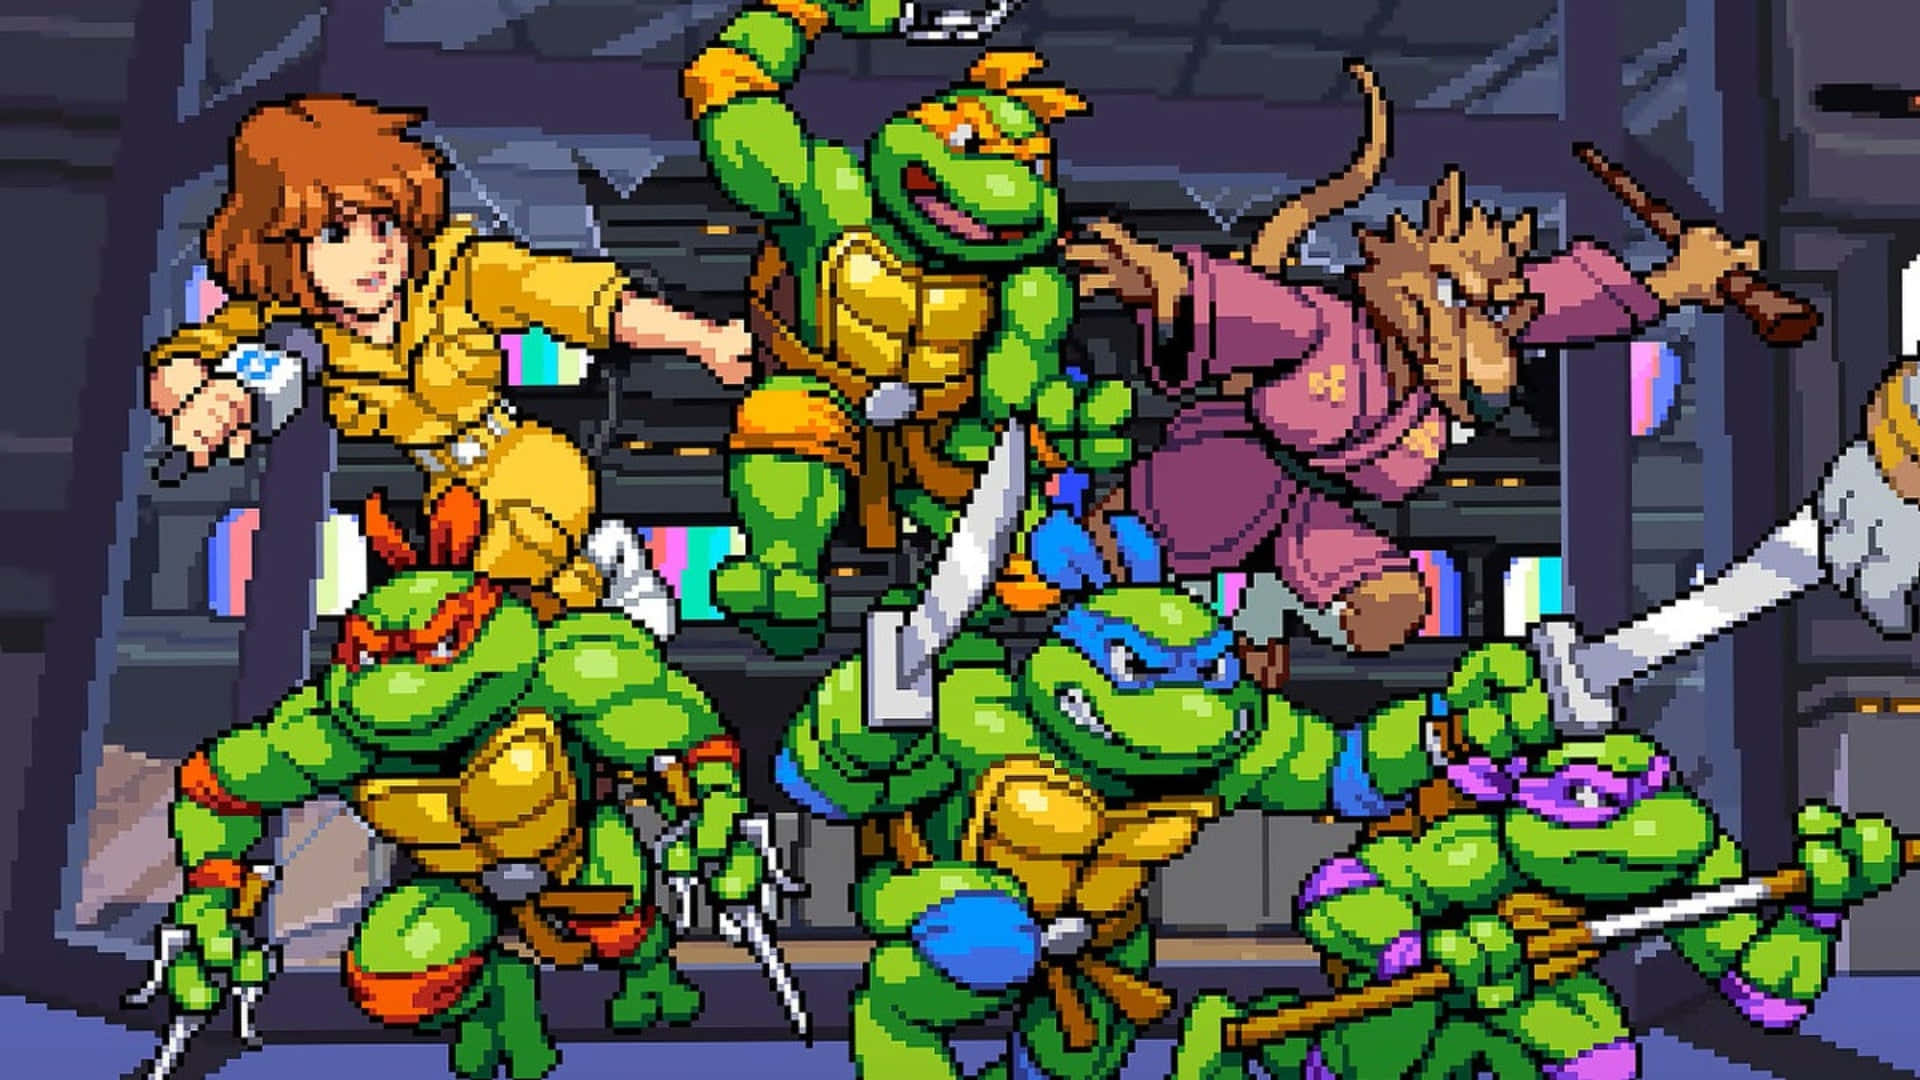 Get Ready to Party with the Turtles! Wallpaper